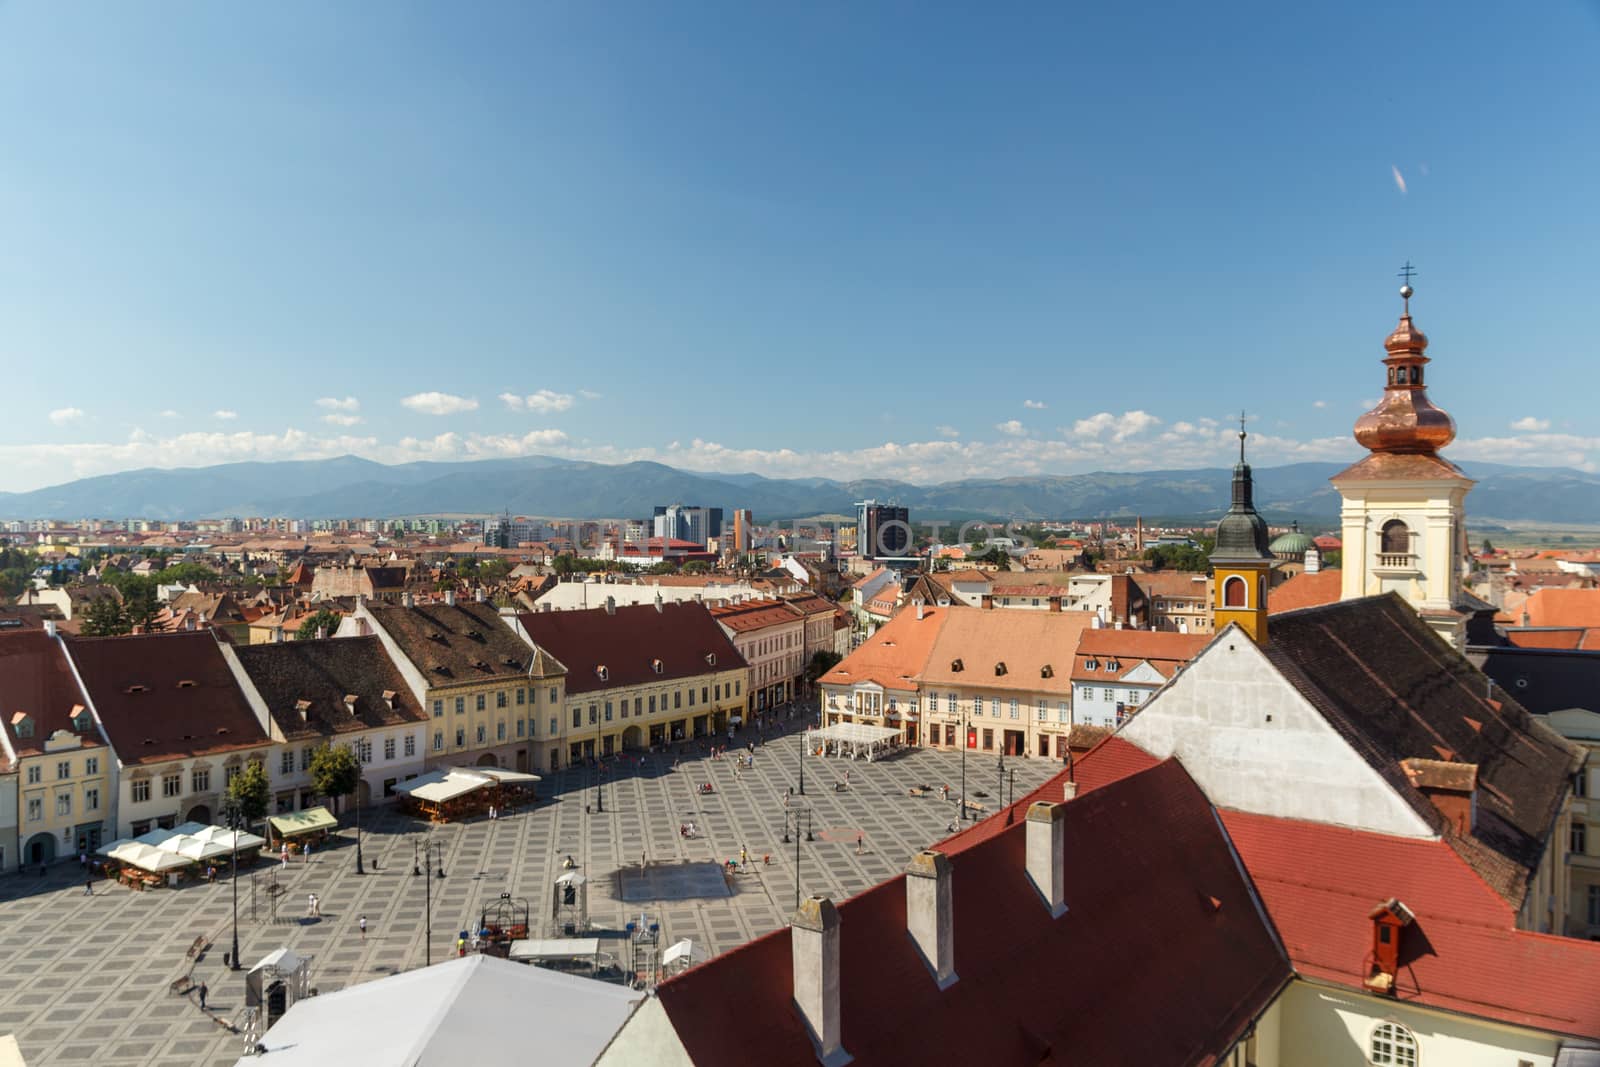 SIBIU, ROMANIA - Circa 2020: High view of old medieval town with cloudy blue sky. Beautiful tourist spot in eastern central Europe. Aerial view of famous Big Square in Sibiu Romania by dugulan